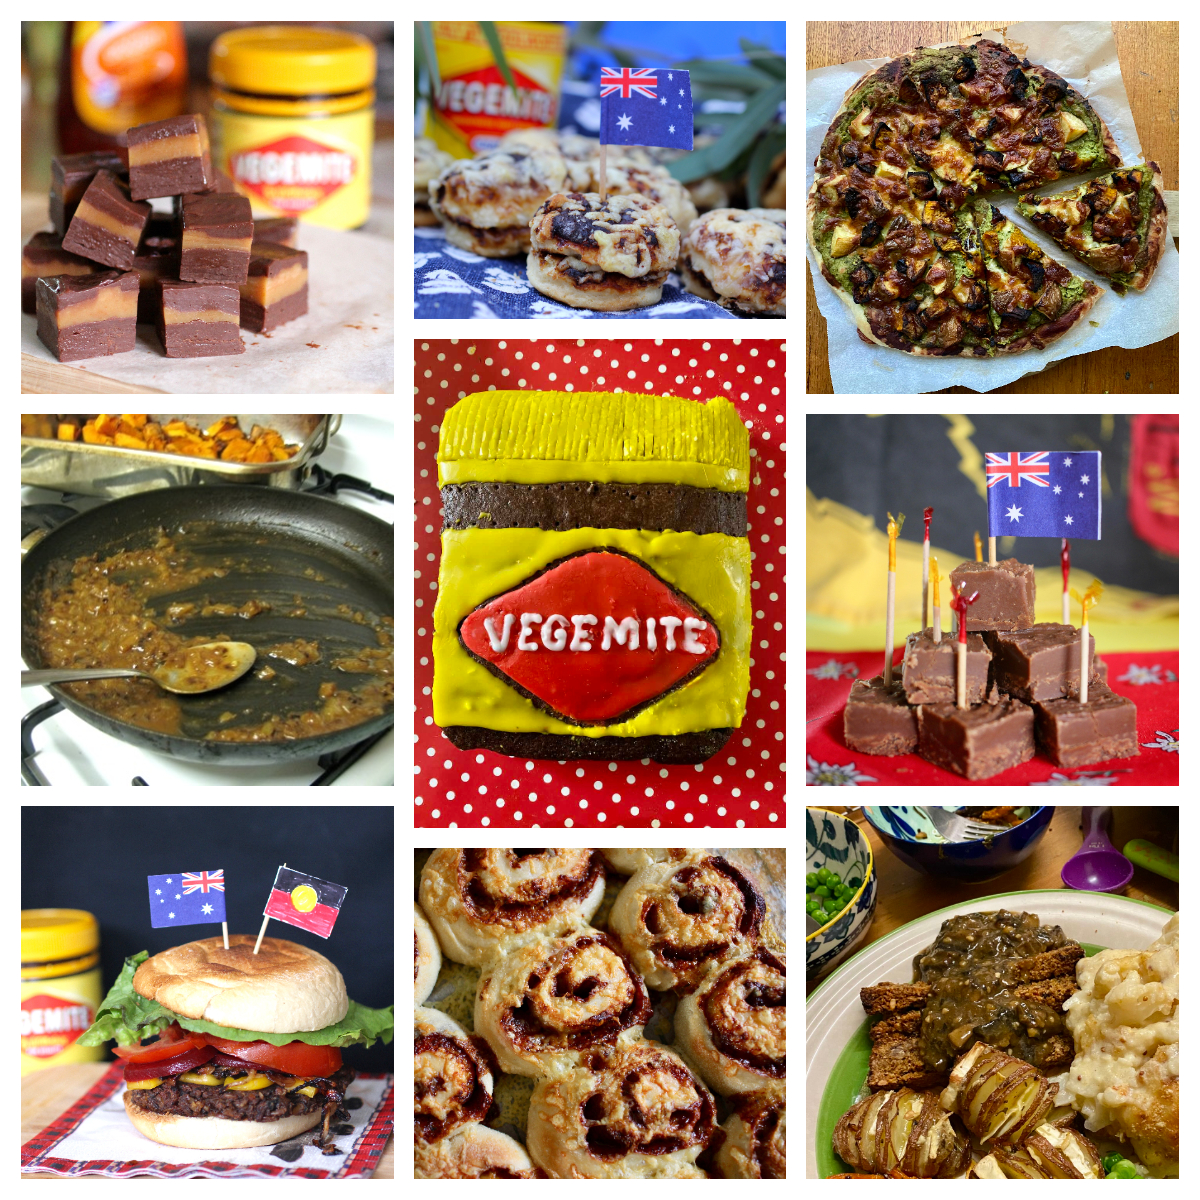 Green Gourmet Giraffe: 20 Vegemite recipes for the 100 year anniversary,  plus reflections and products